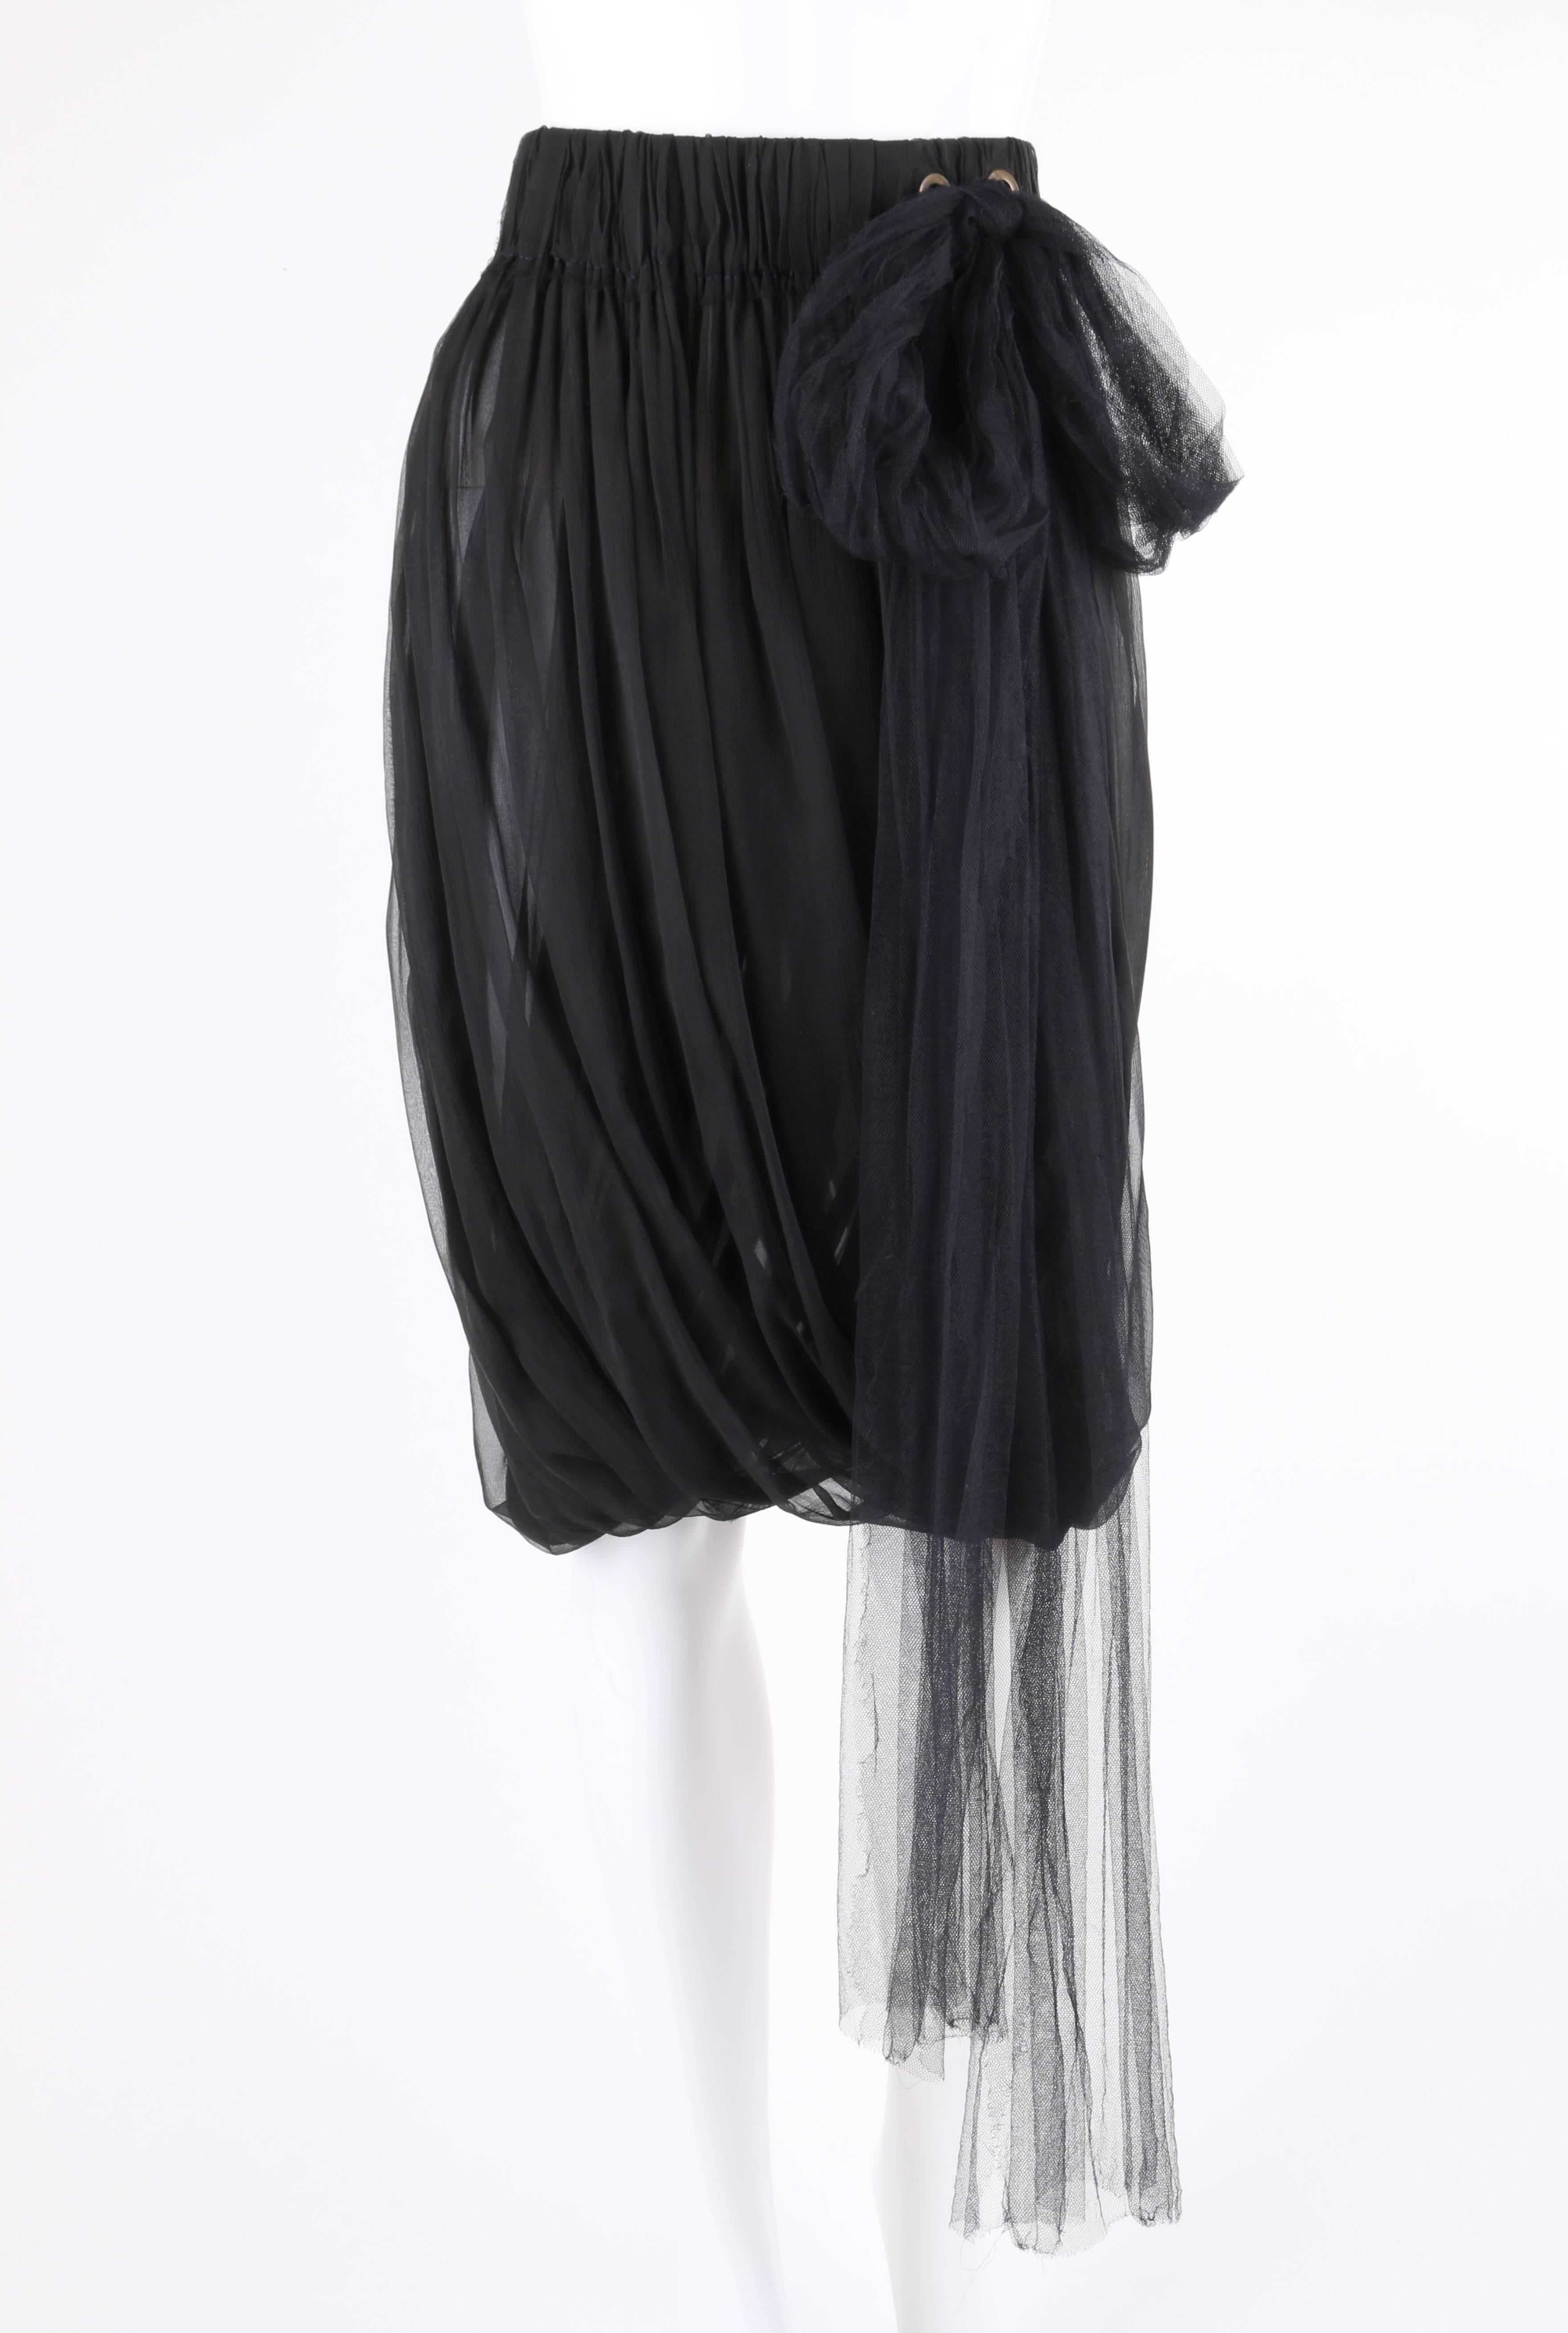 Lanvin Spring/Summer 2006 black semi-sheer silk chiffon pleated bubble skirt. Designed by Alber Elbaz. Pleated black semi-sheer silk crinkle chiffon. Wide elastic waistband with two brass-toned grommets at side. Black silk tulle tie fed through